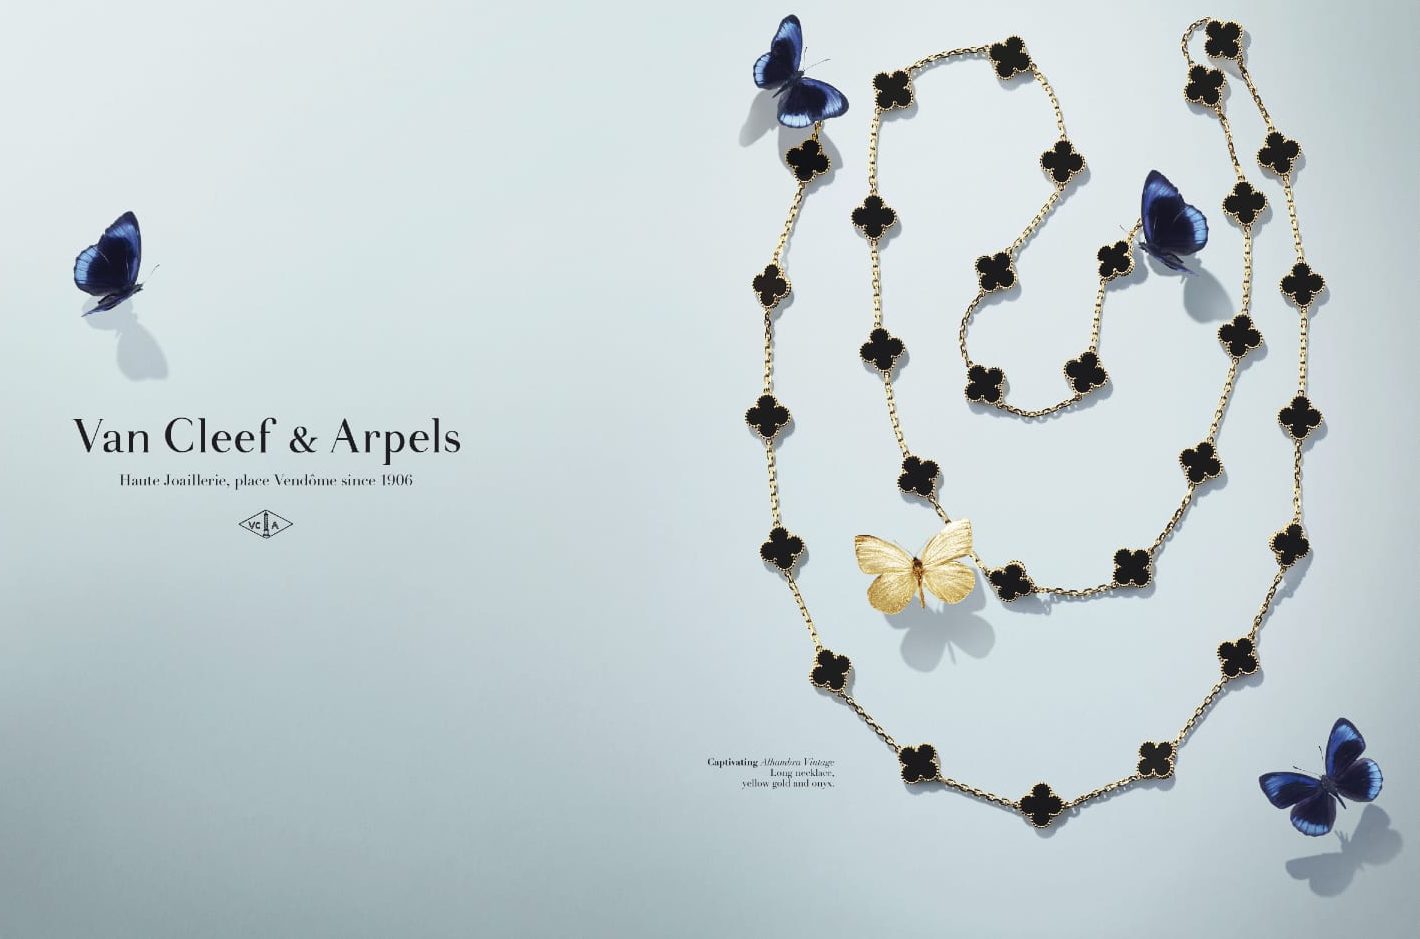 One of Van Cleef Arpels' Most Famous Trademarks is in Limbo in China - The Law